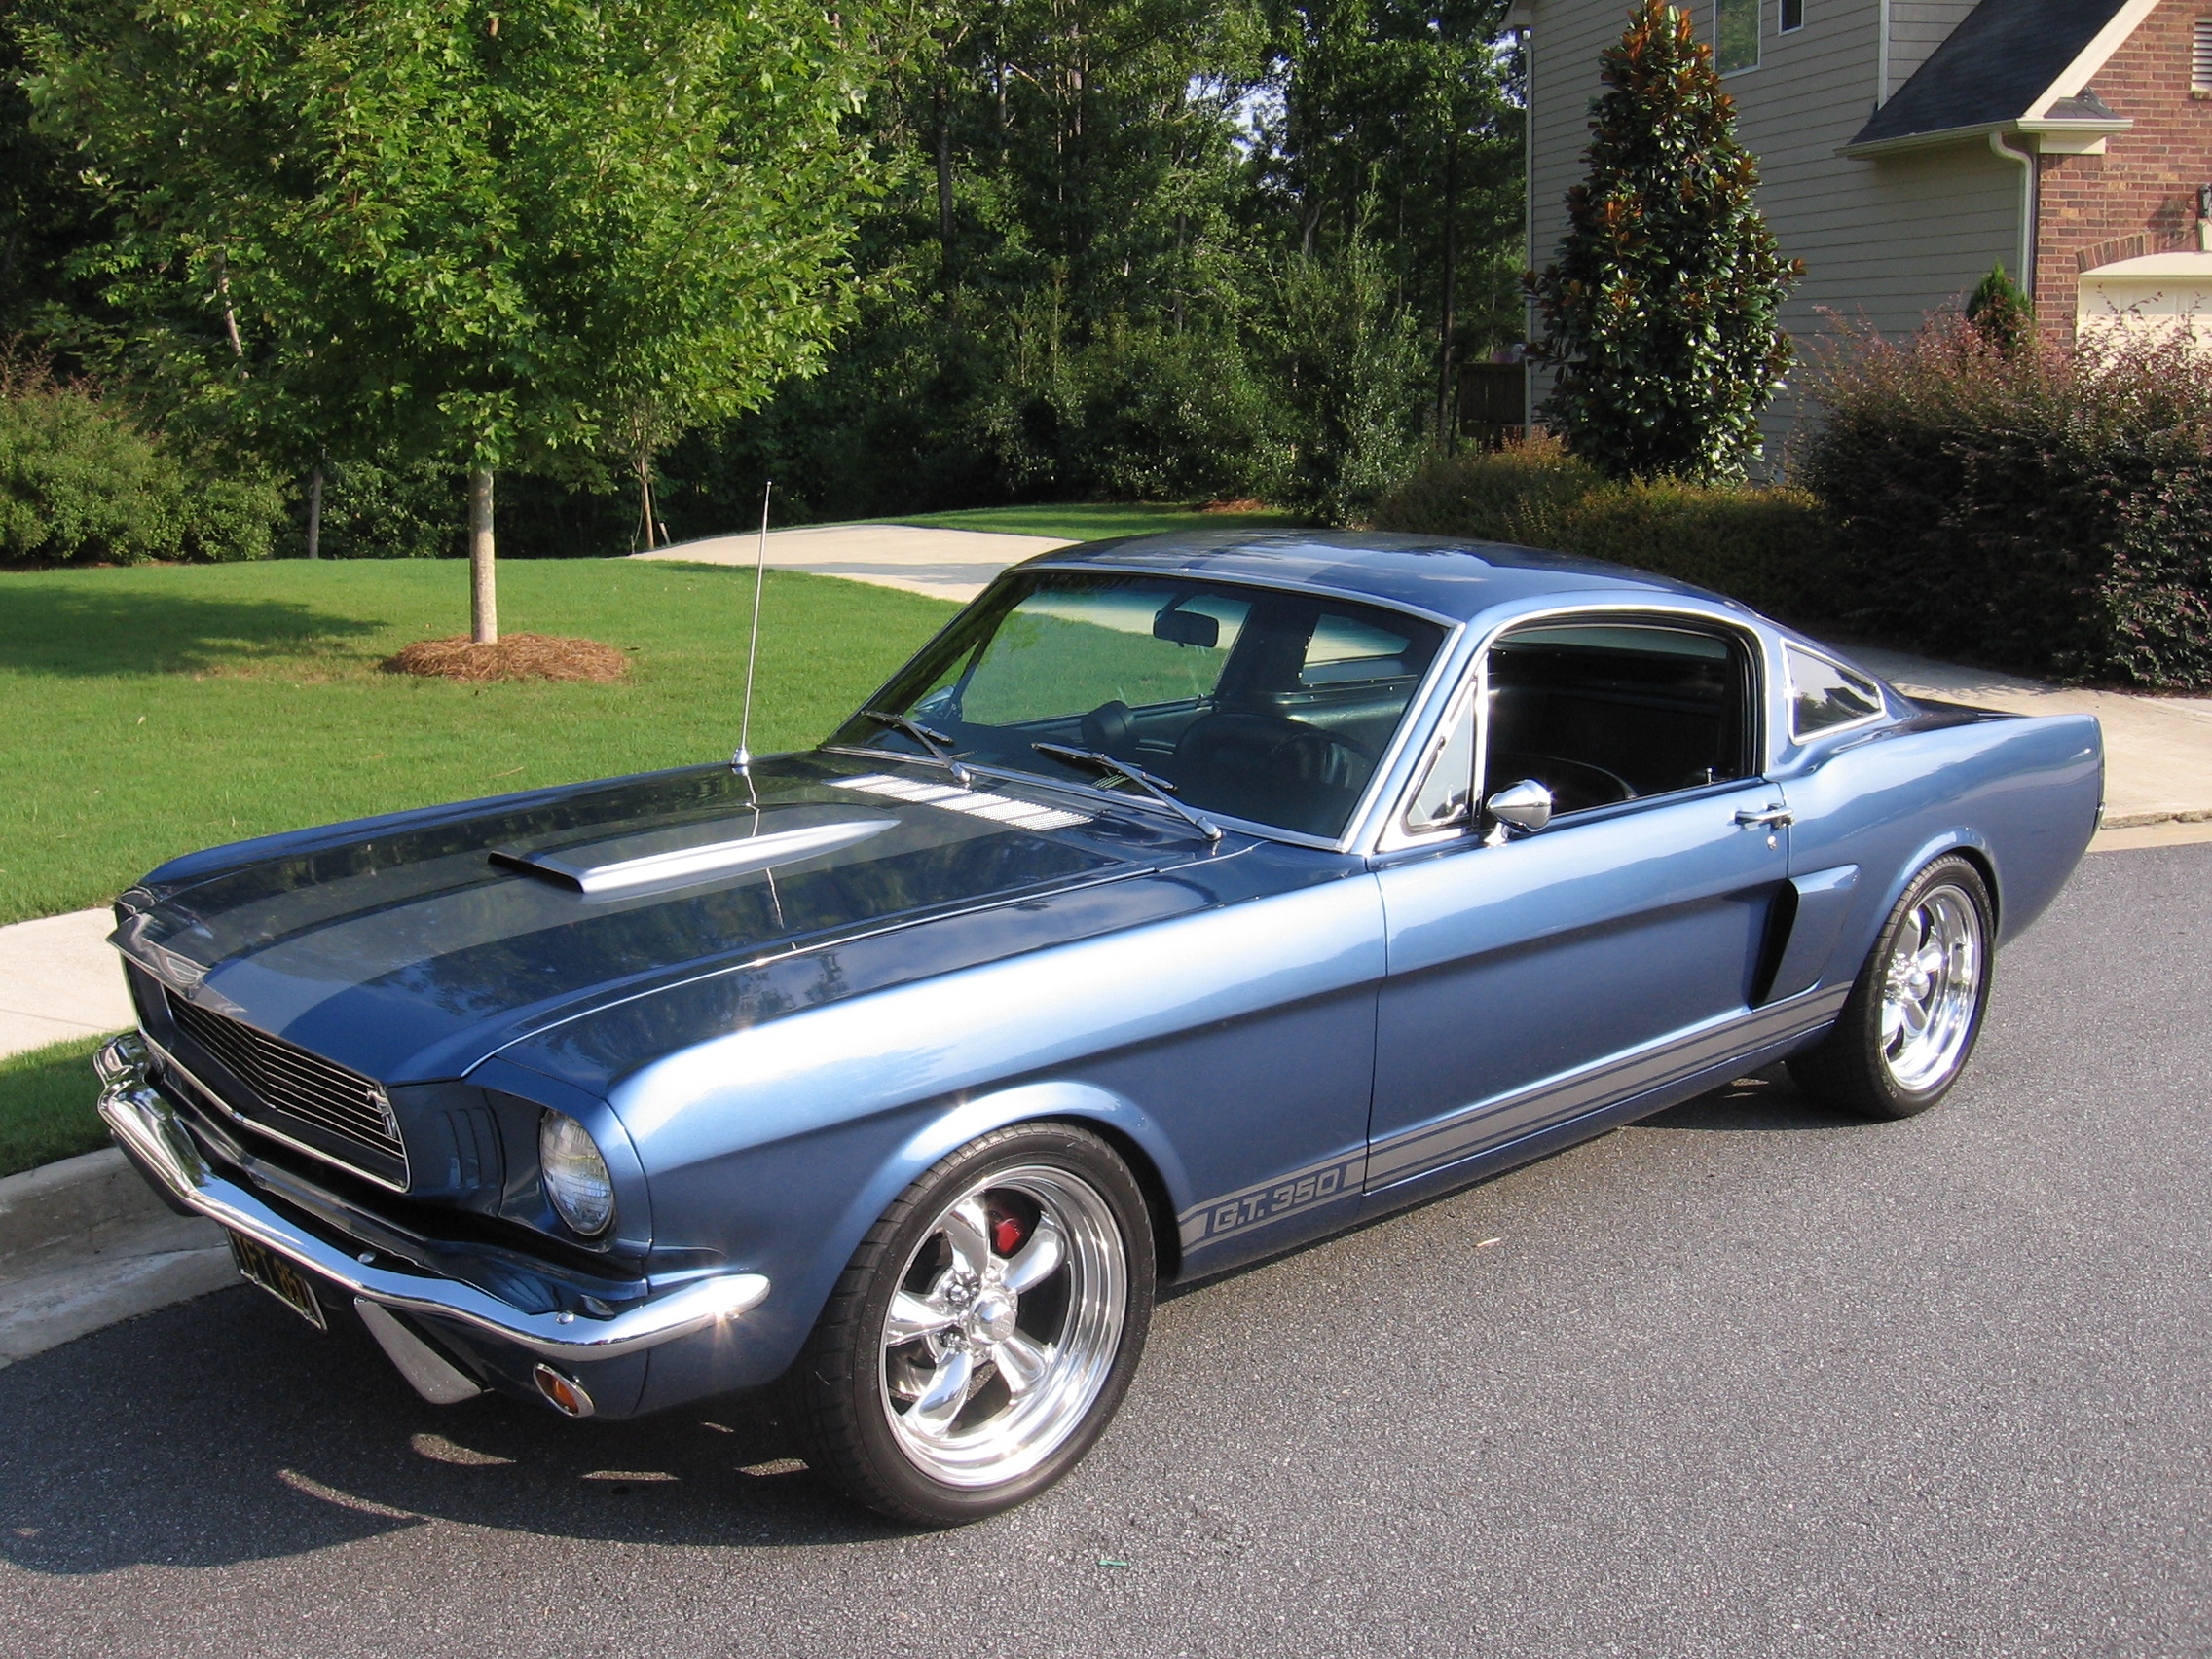 Ford Shelby Gt350 Fastback Muscle Car Blue Car Car 2272x1704